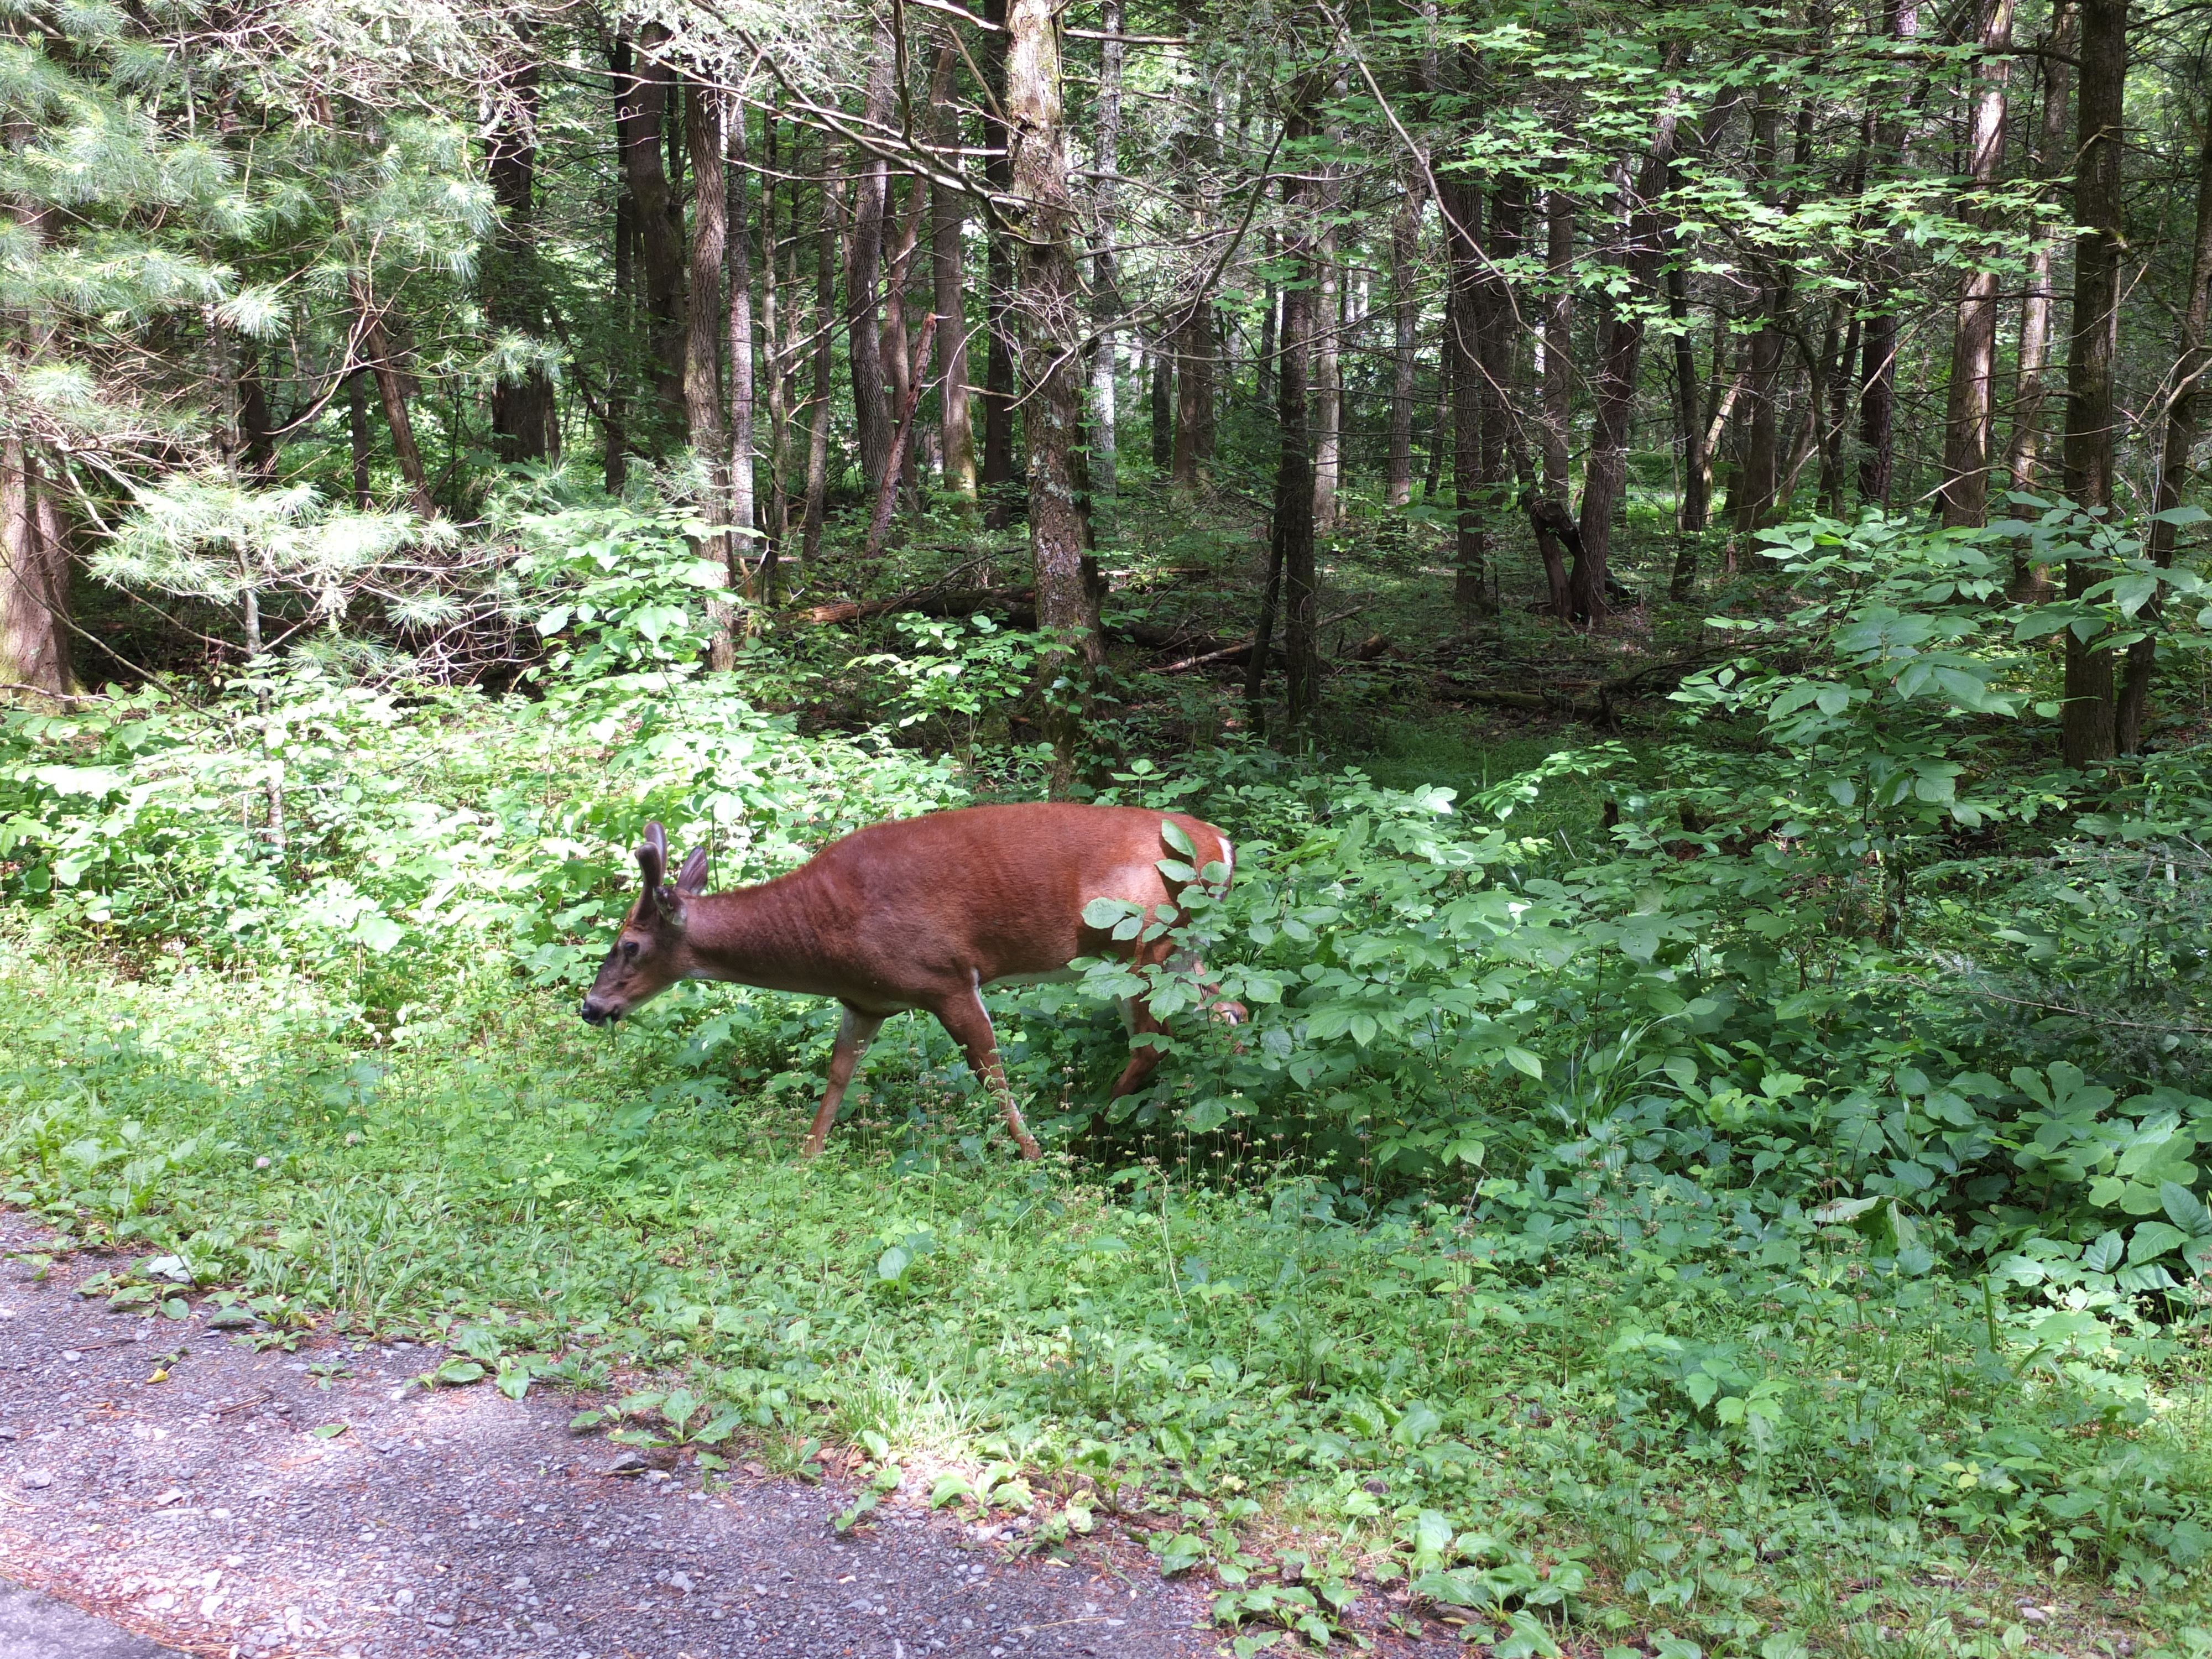 Wildlife in the Great Smoky Mountains